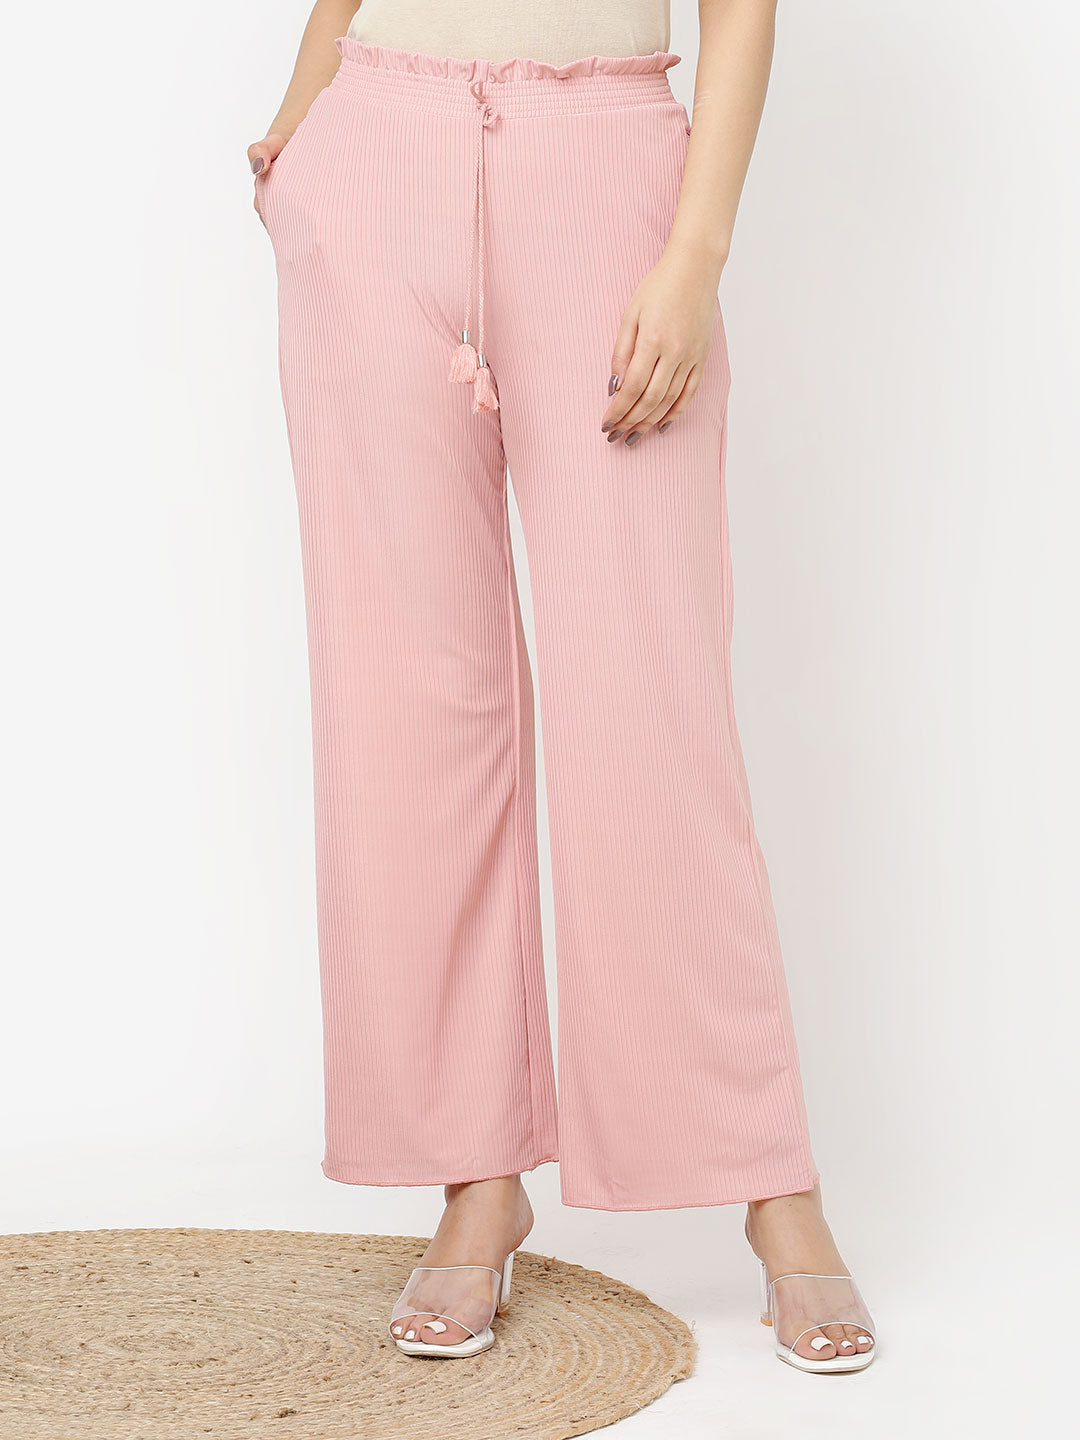 Buy Buy That Trendz M to 4XL Cotton Viscose Loose Fit Flared Wide Leg  Palazzo Pants for Women Rani Pink Light Skin Combo Pack of 2 Medium at  Amazon.in